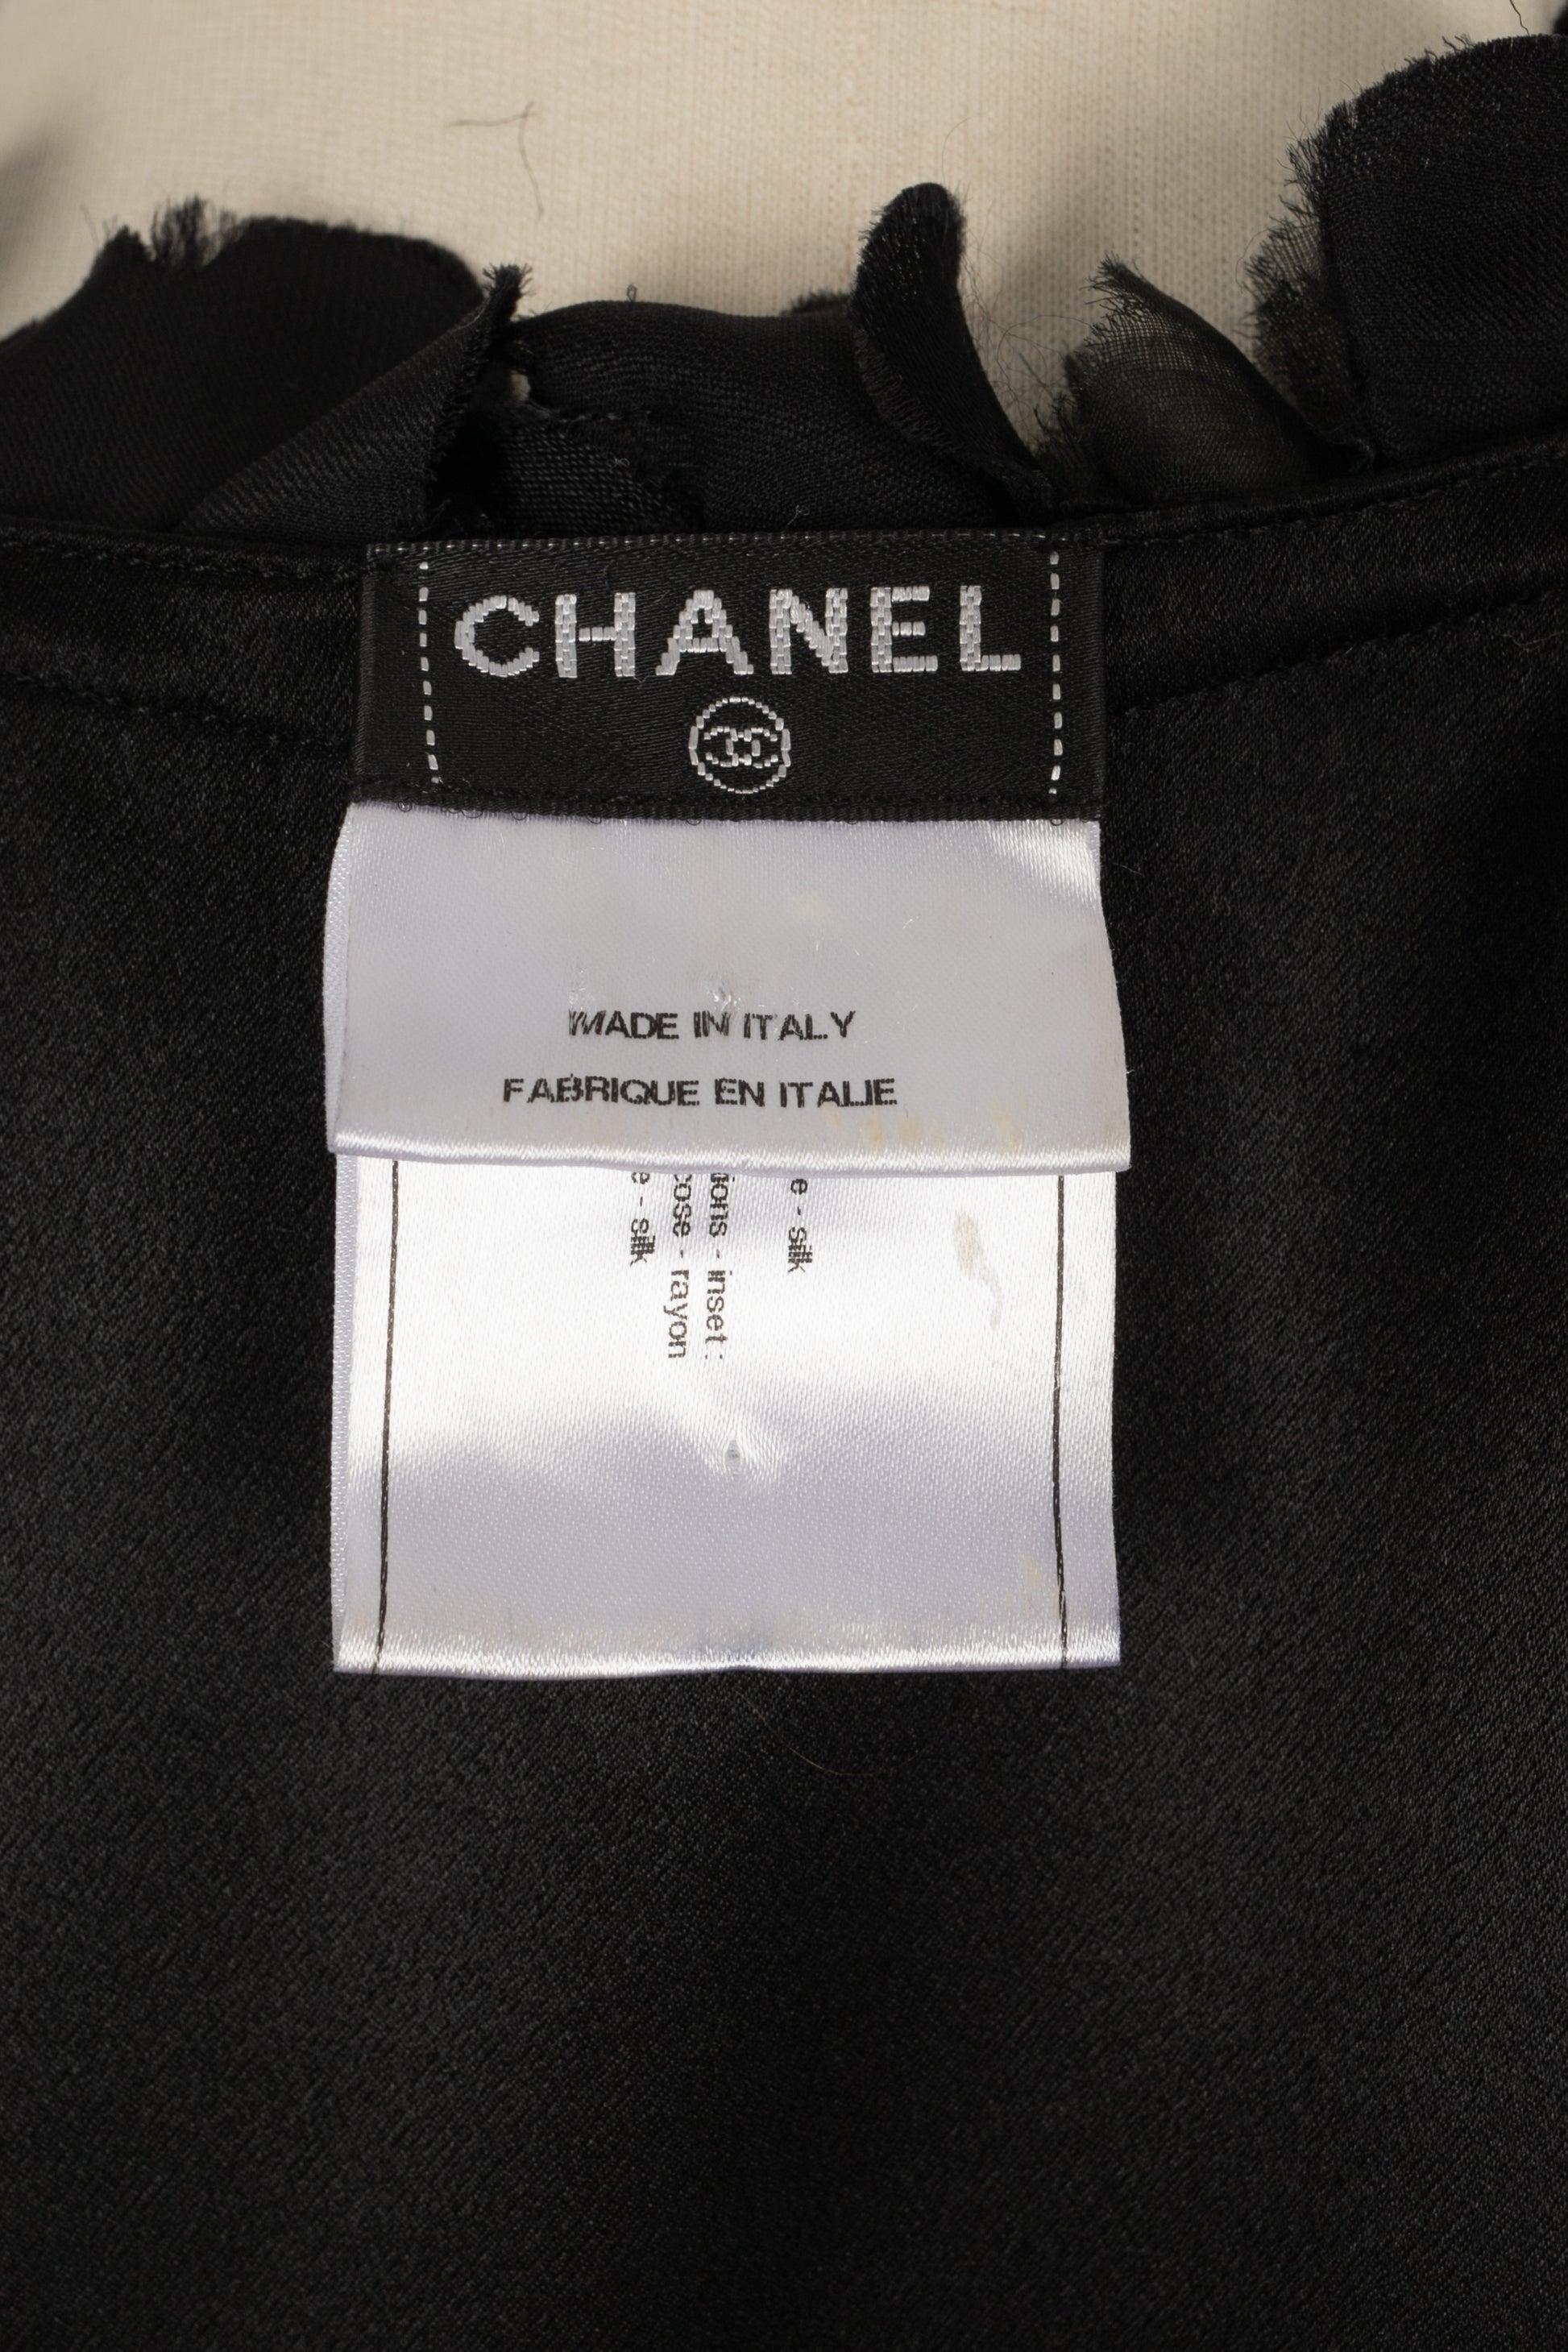 Chanel Black Silk Satin Blouse Top For Sale 3